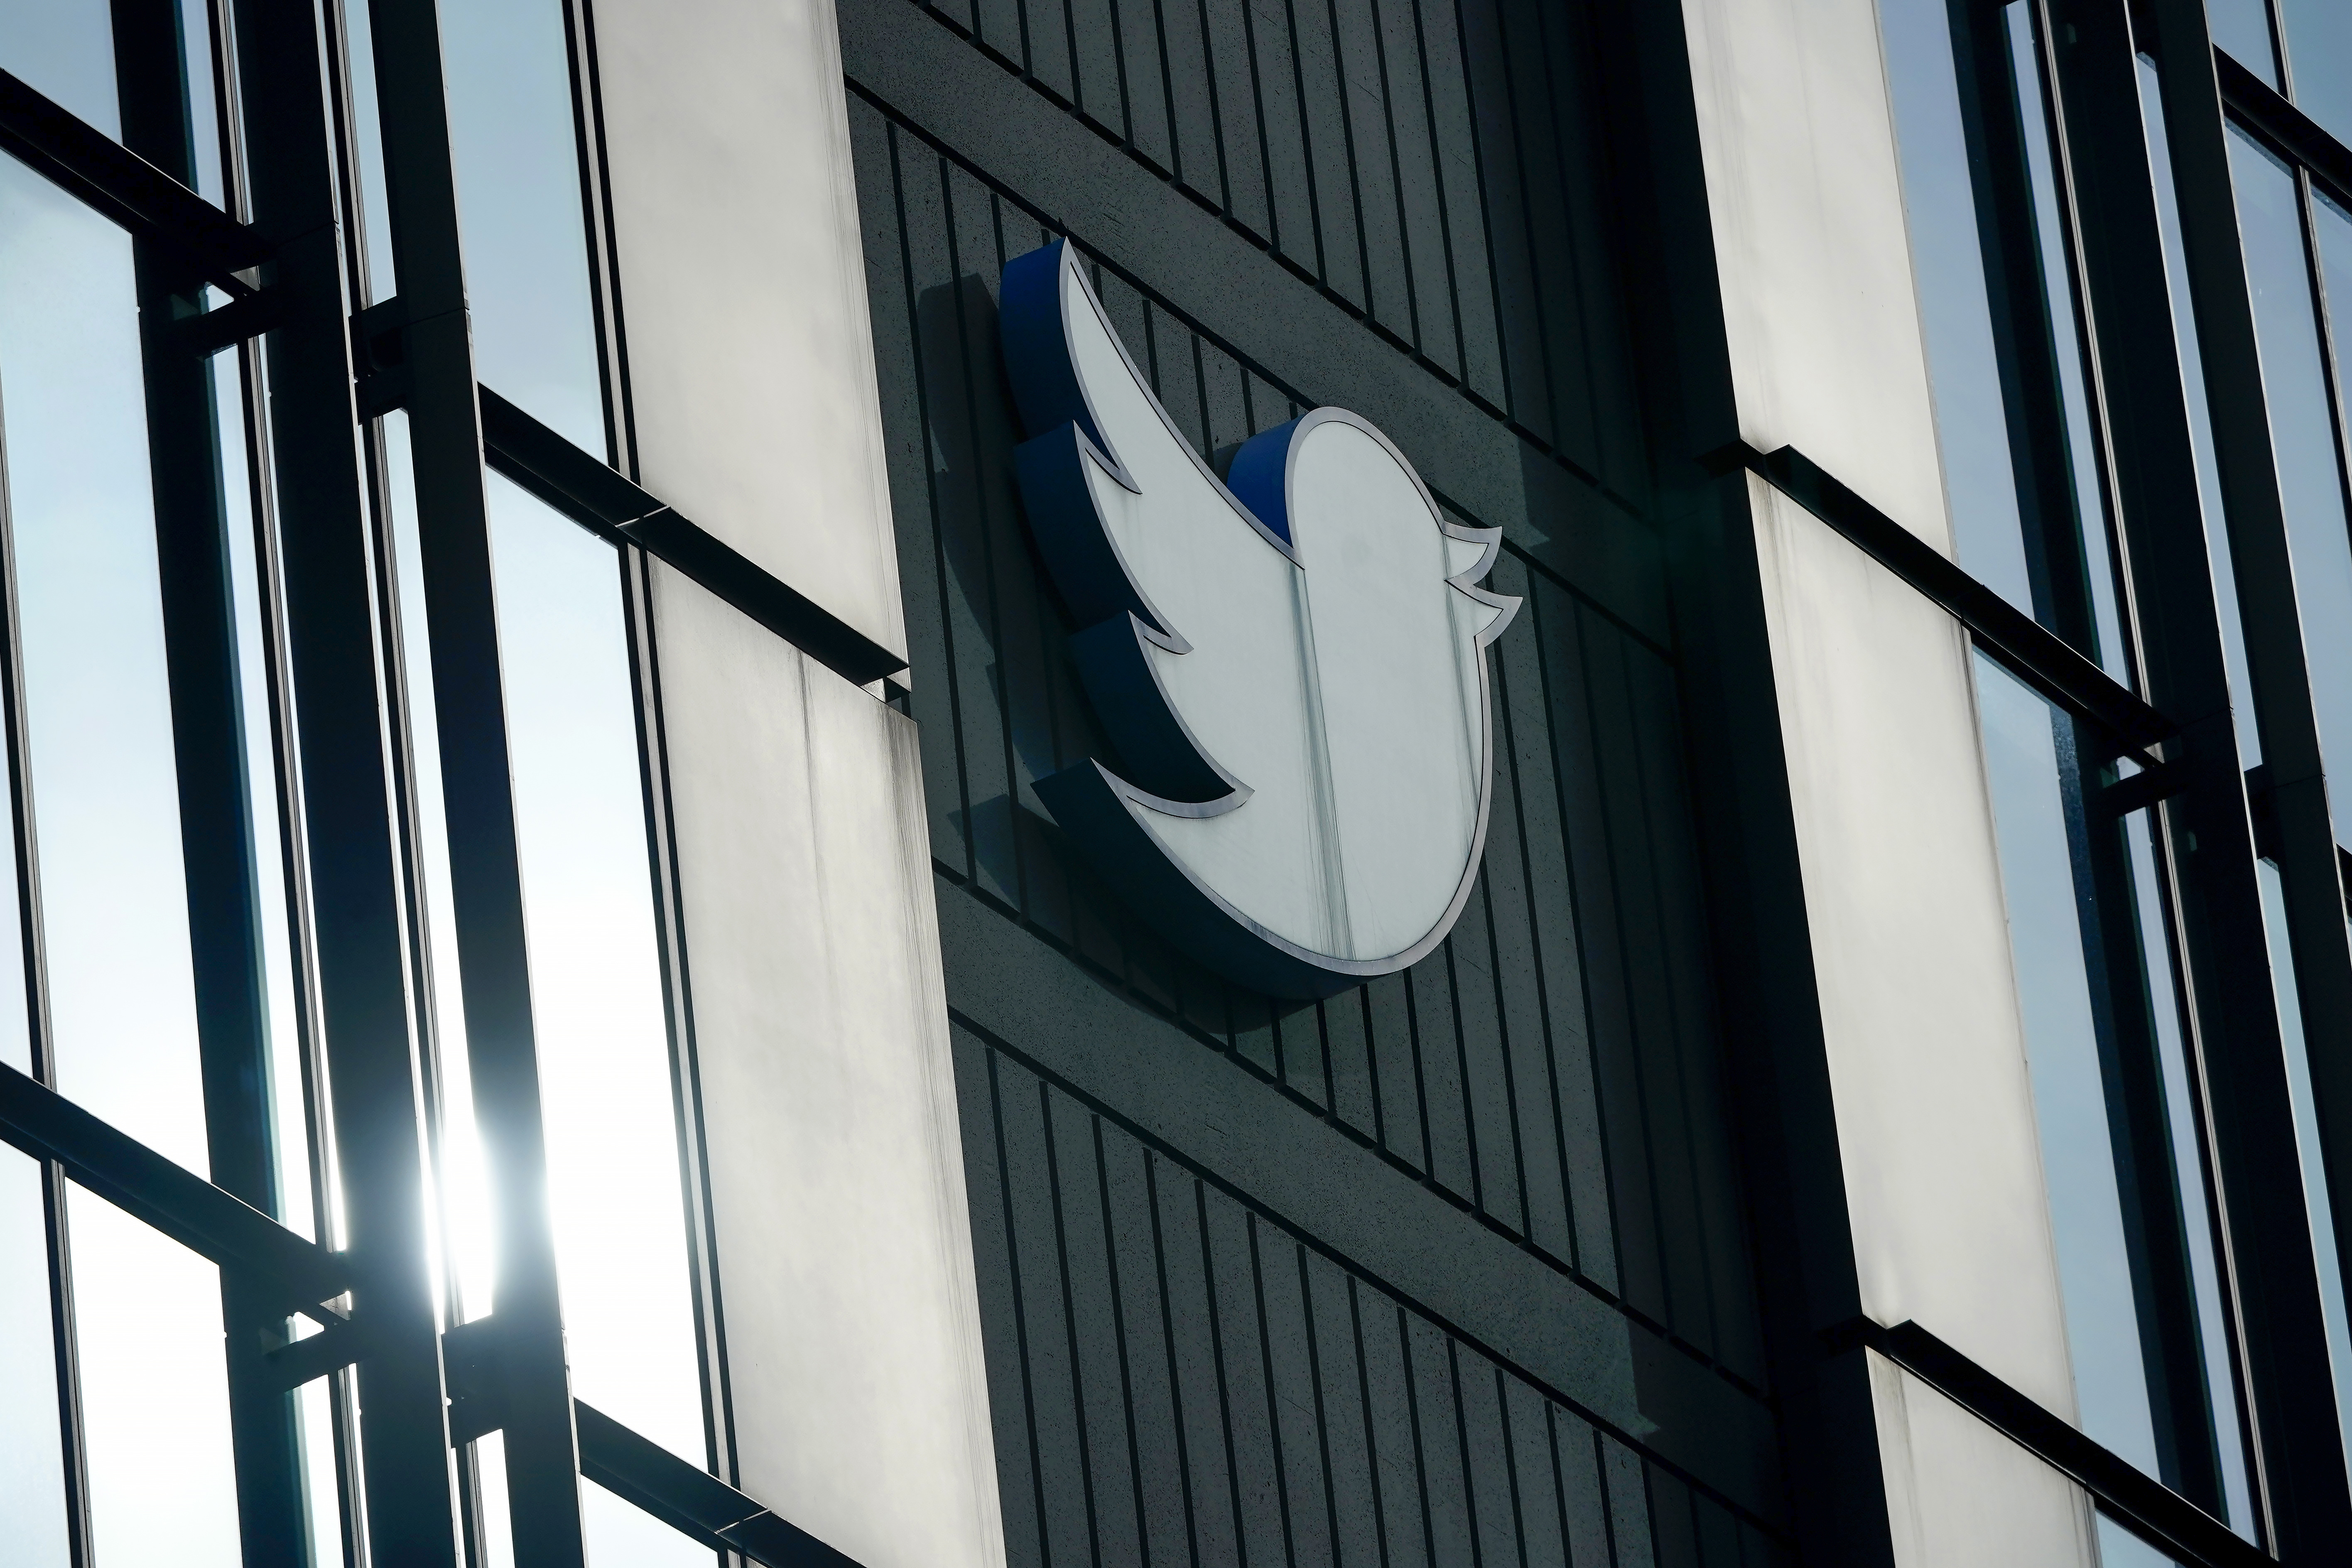 FILE - A Twitter logo hangs outside the company's offices in San Francisco, Dec. 19, 2022. Elon Musk said Thursday, May 11, 2023, that he has found a new CEO for Twitter, or X Corp. as it is now called. He did not name the person but she will be starting in about six weeks. (AP Photo/Jeff Chiu, File)